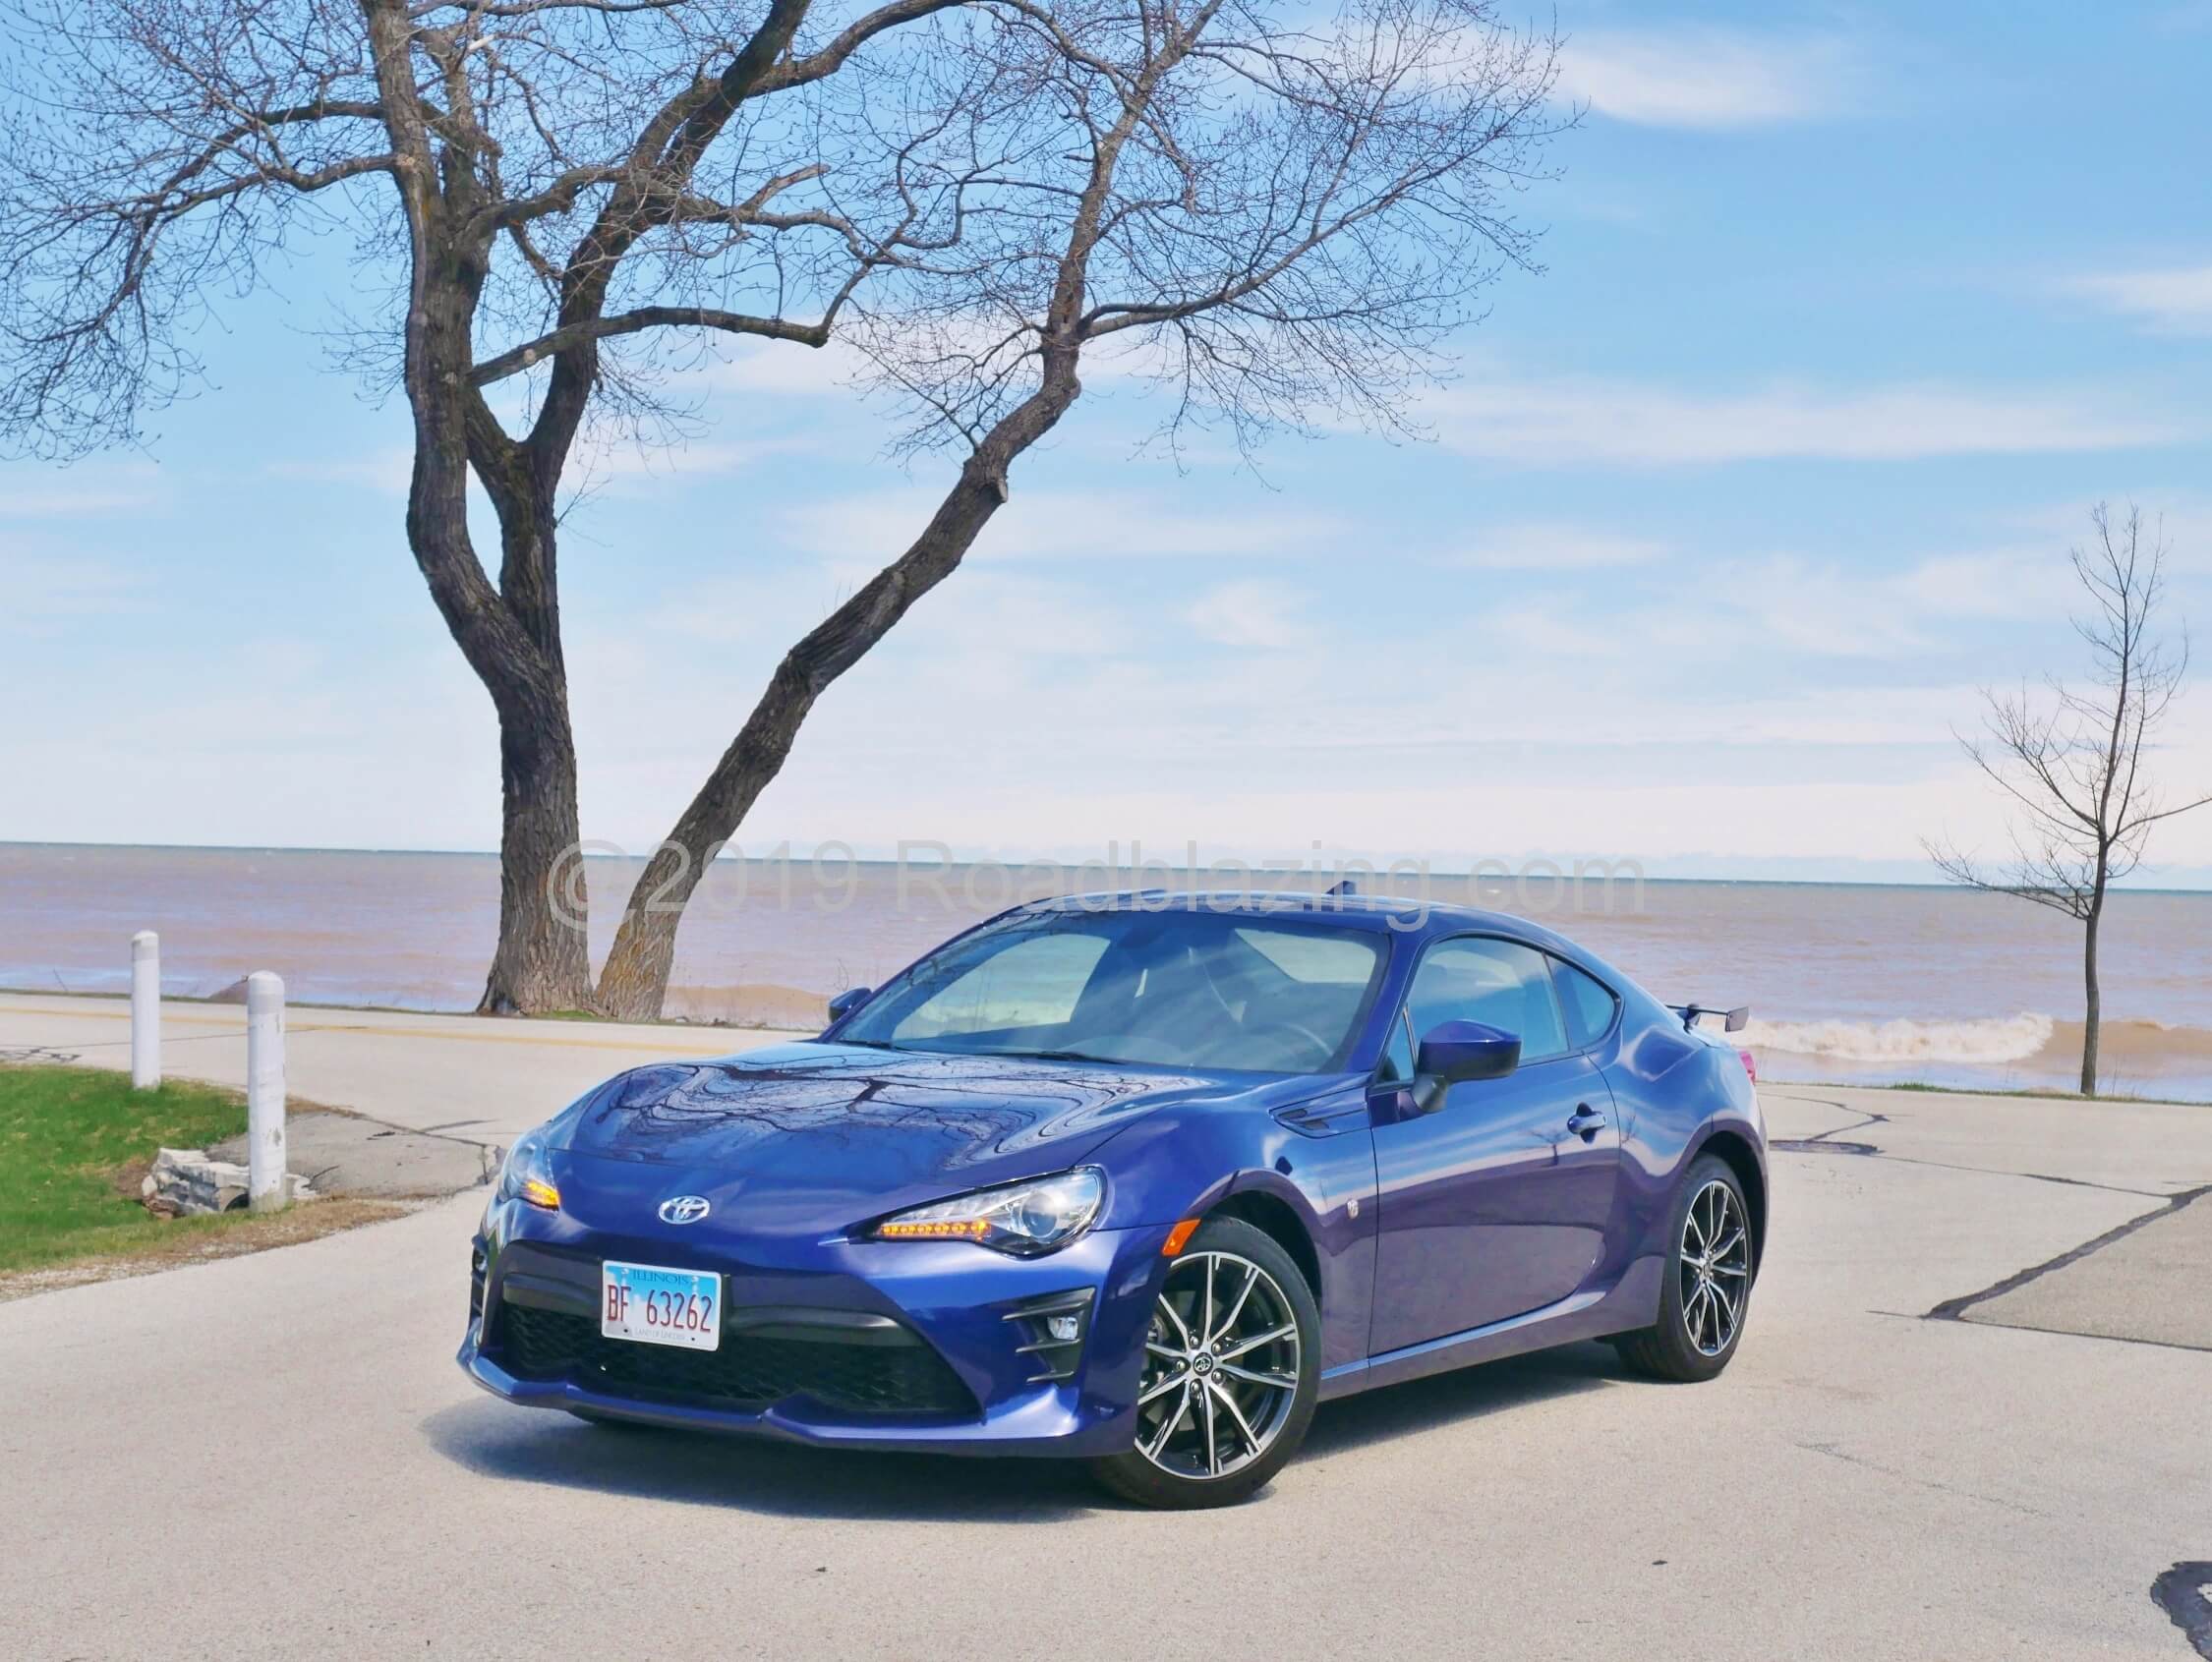 2019 Toyota 86 GT: Oceanic Blue emerges from stormy surf of Milwaukee's Lake Michigan shoreline, with straked front fascia corners contributing to low 0.27 Cd drag; LED lights and amber LED directionals now included